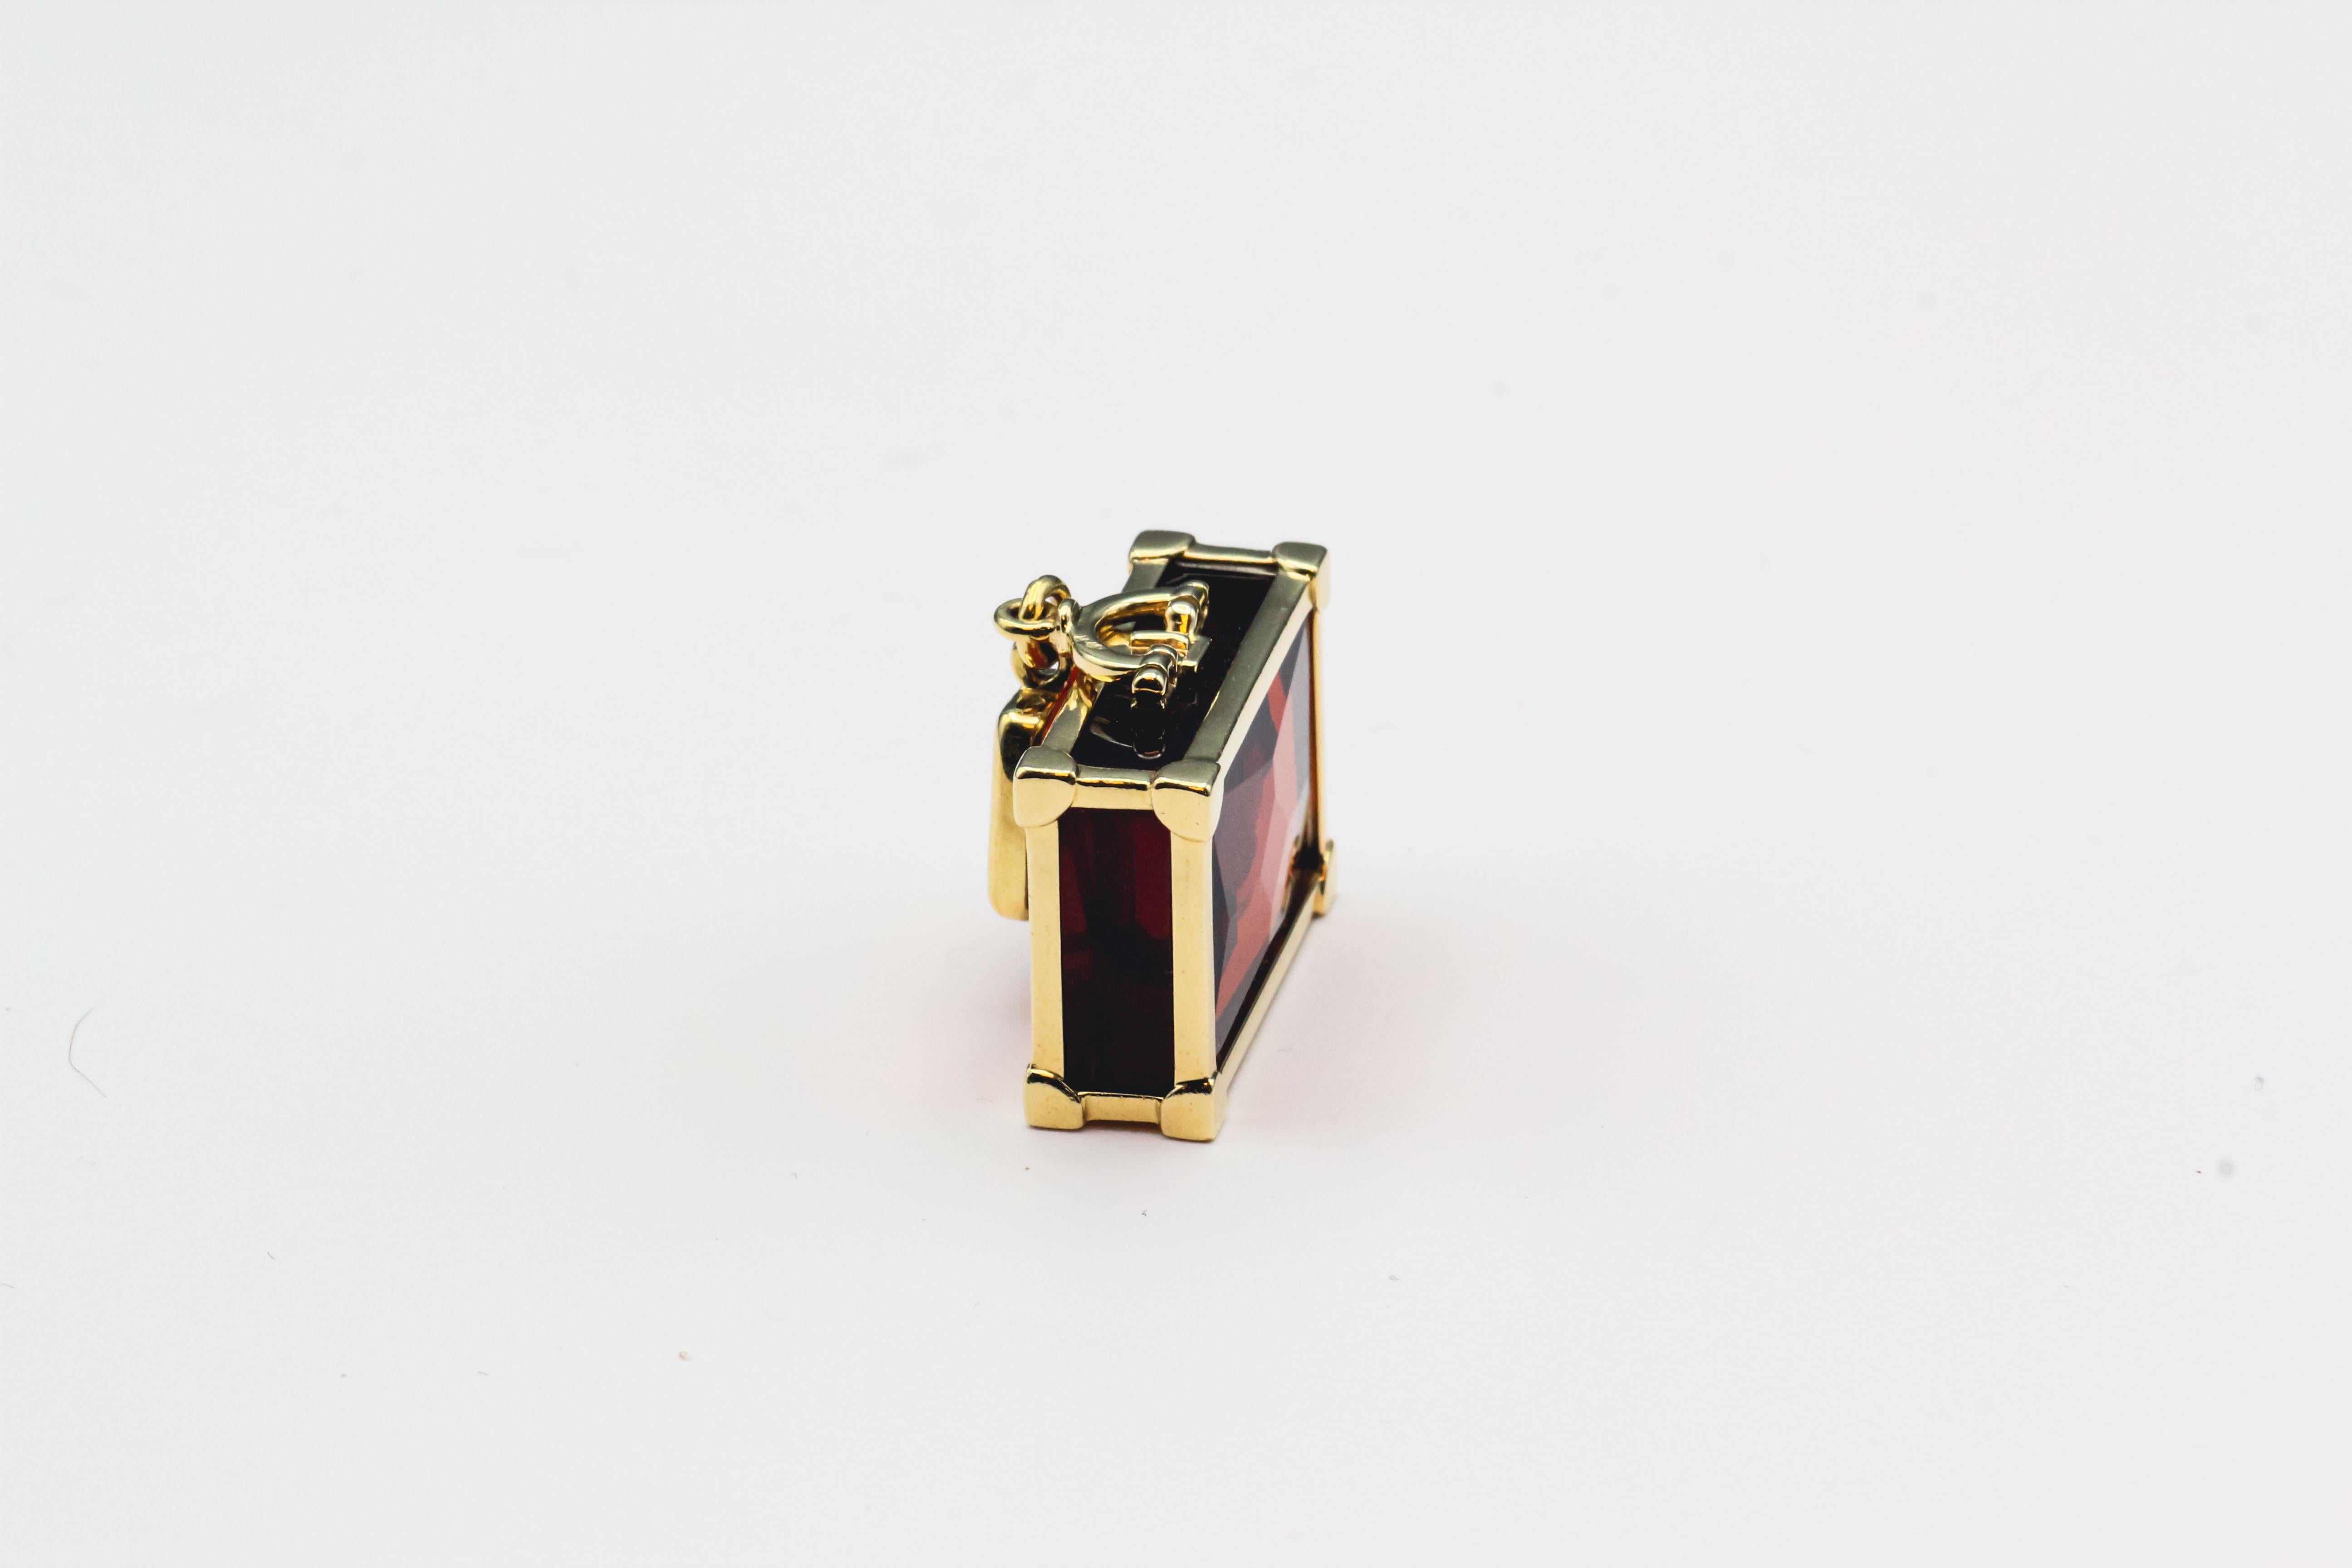 Fine 18K yellow gold and citrine suitcase pendant/charm by Louis Vuitton. It features a rich citrine body with 18k yellow gold hardware.  Well made and easy to add to any bracelet or worn as a pendant.  With original box.

Hallmarks: Louis Vuitton,